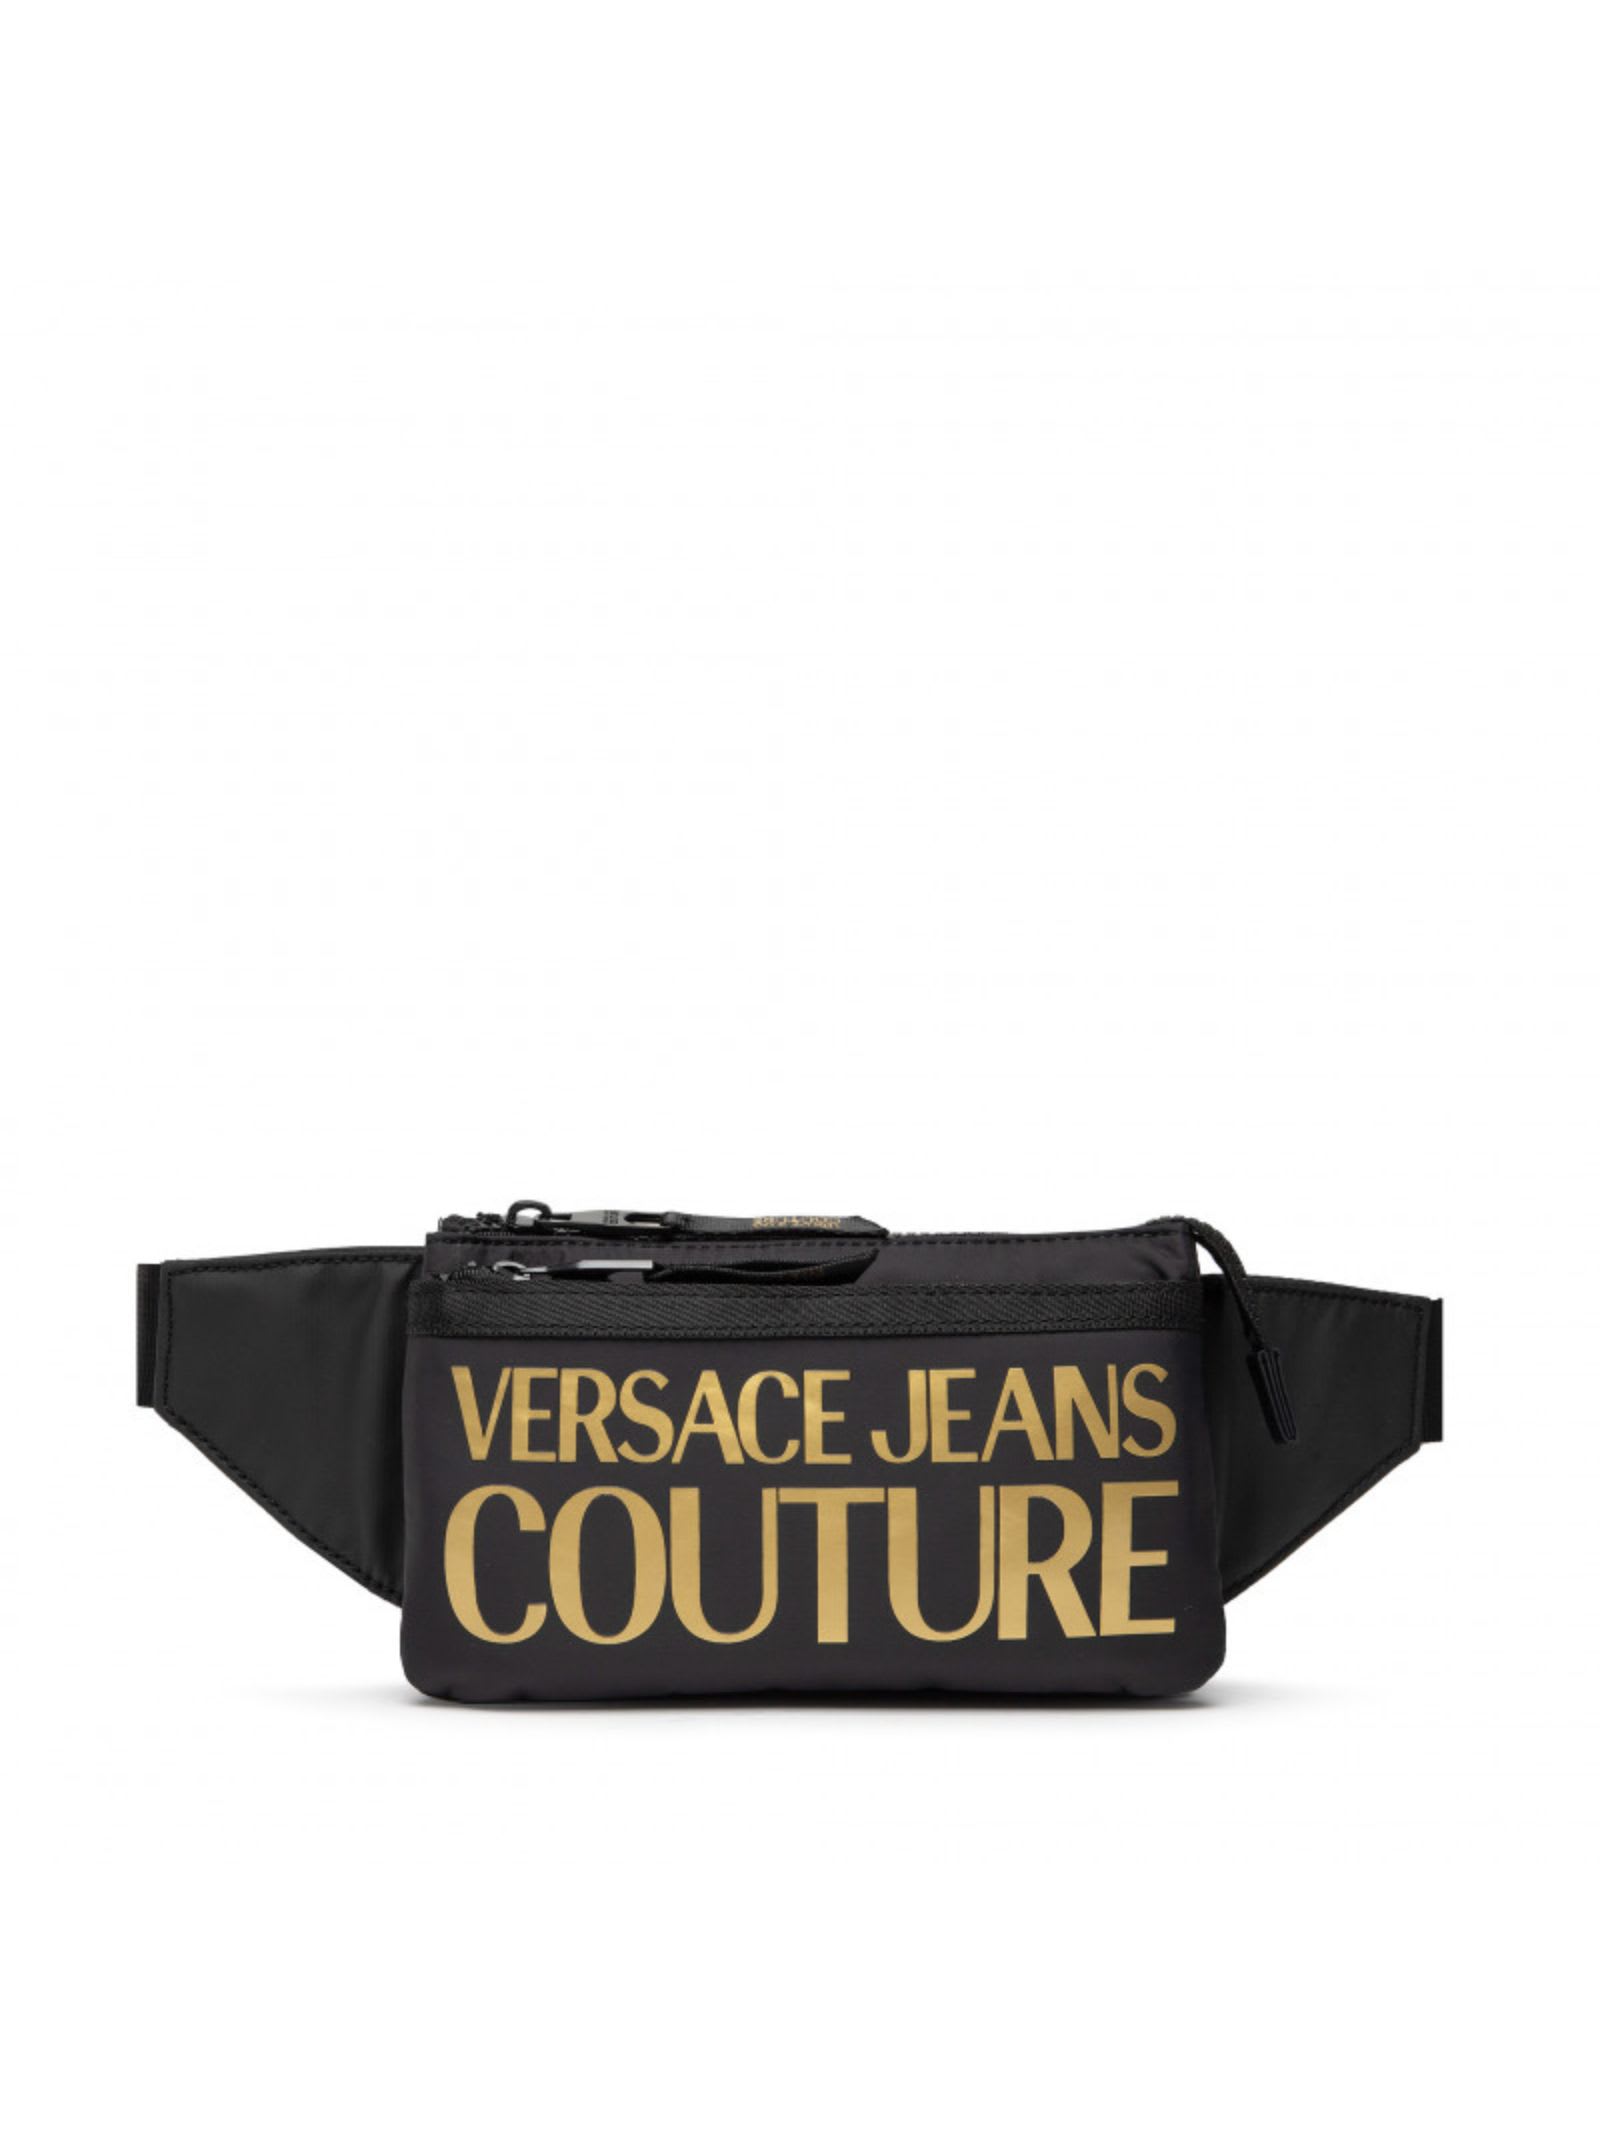 Versace Jeans Couture Bag In Black/gold